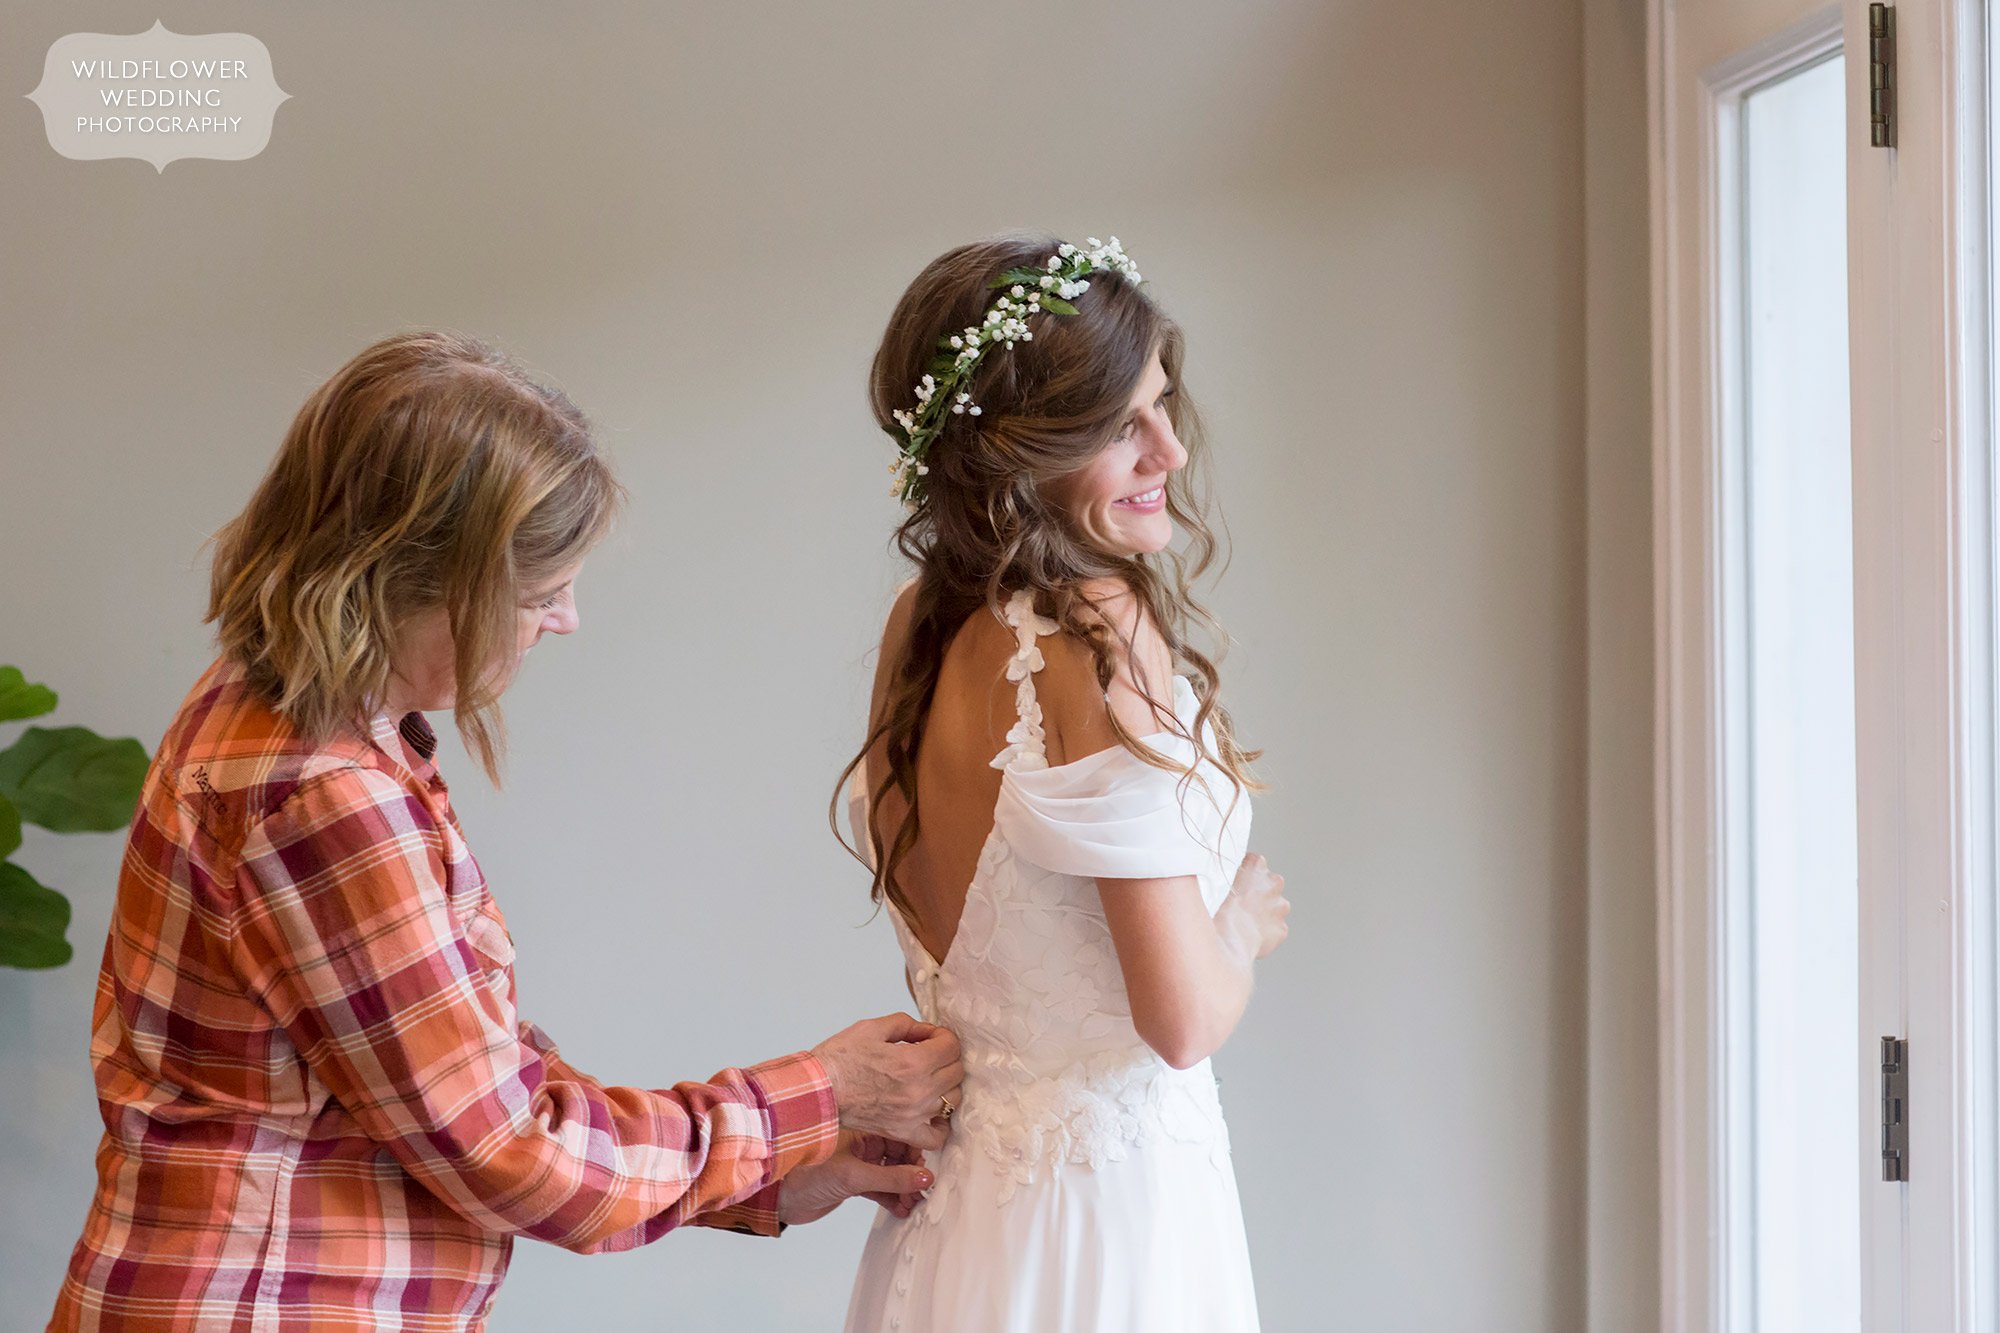 Great candid photographer captures bride's mom putting on dress at this Little Piney Lodge wedding.